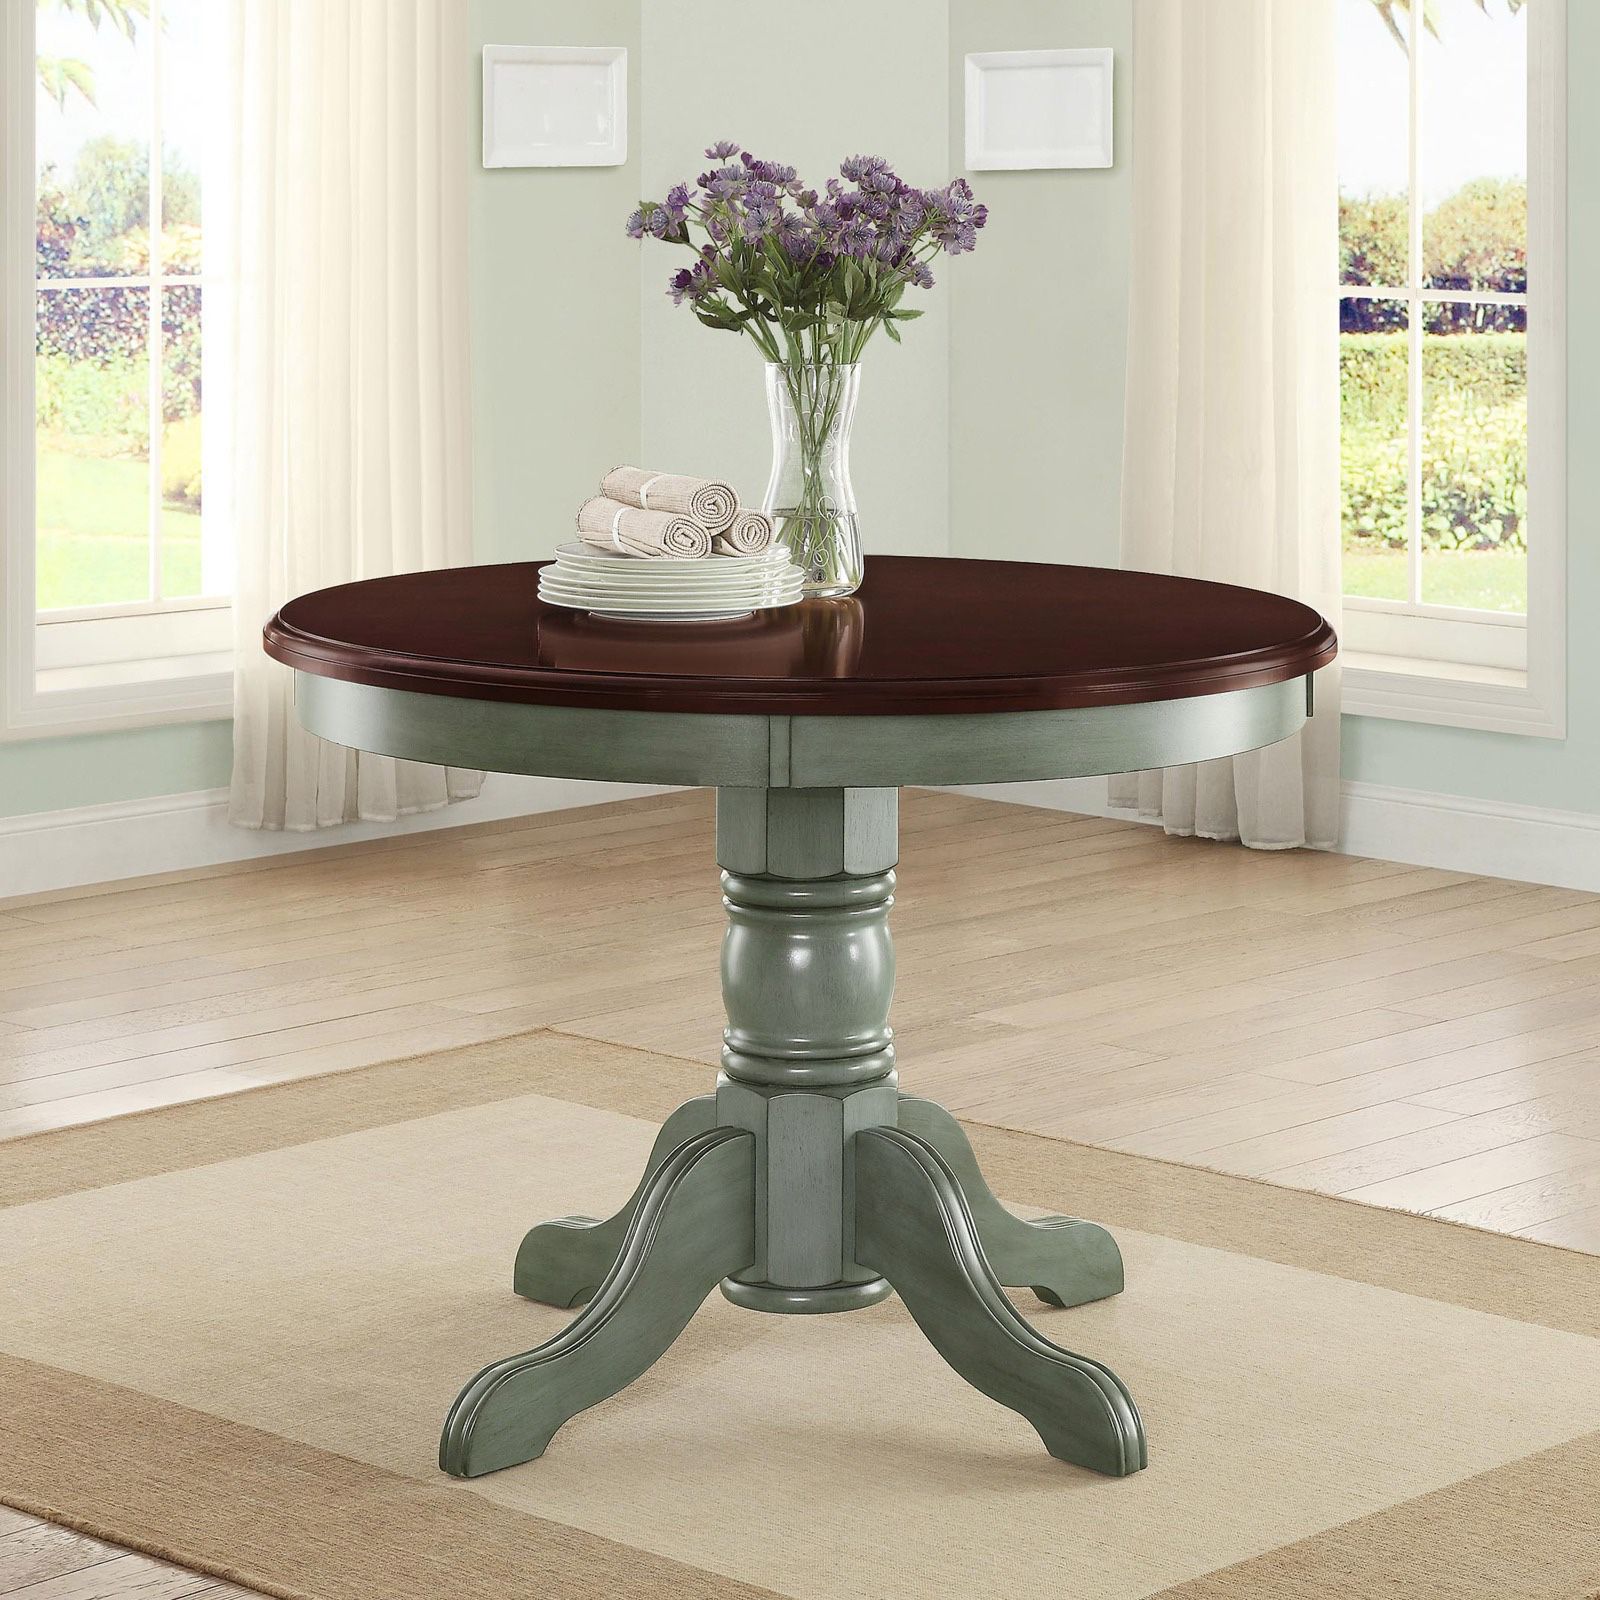 Better Homes and Gardens Cambridge Place Dining Table DESCRIPTION:This modern table adds a contemporary feel to your dining room or kitchen area Ide